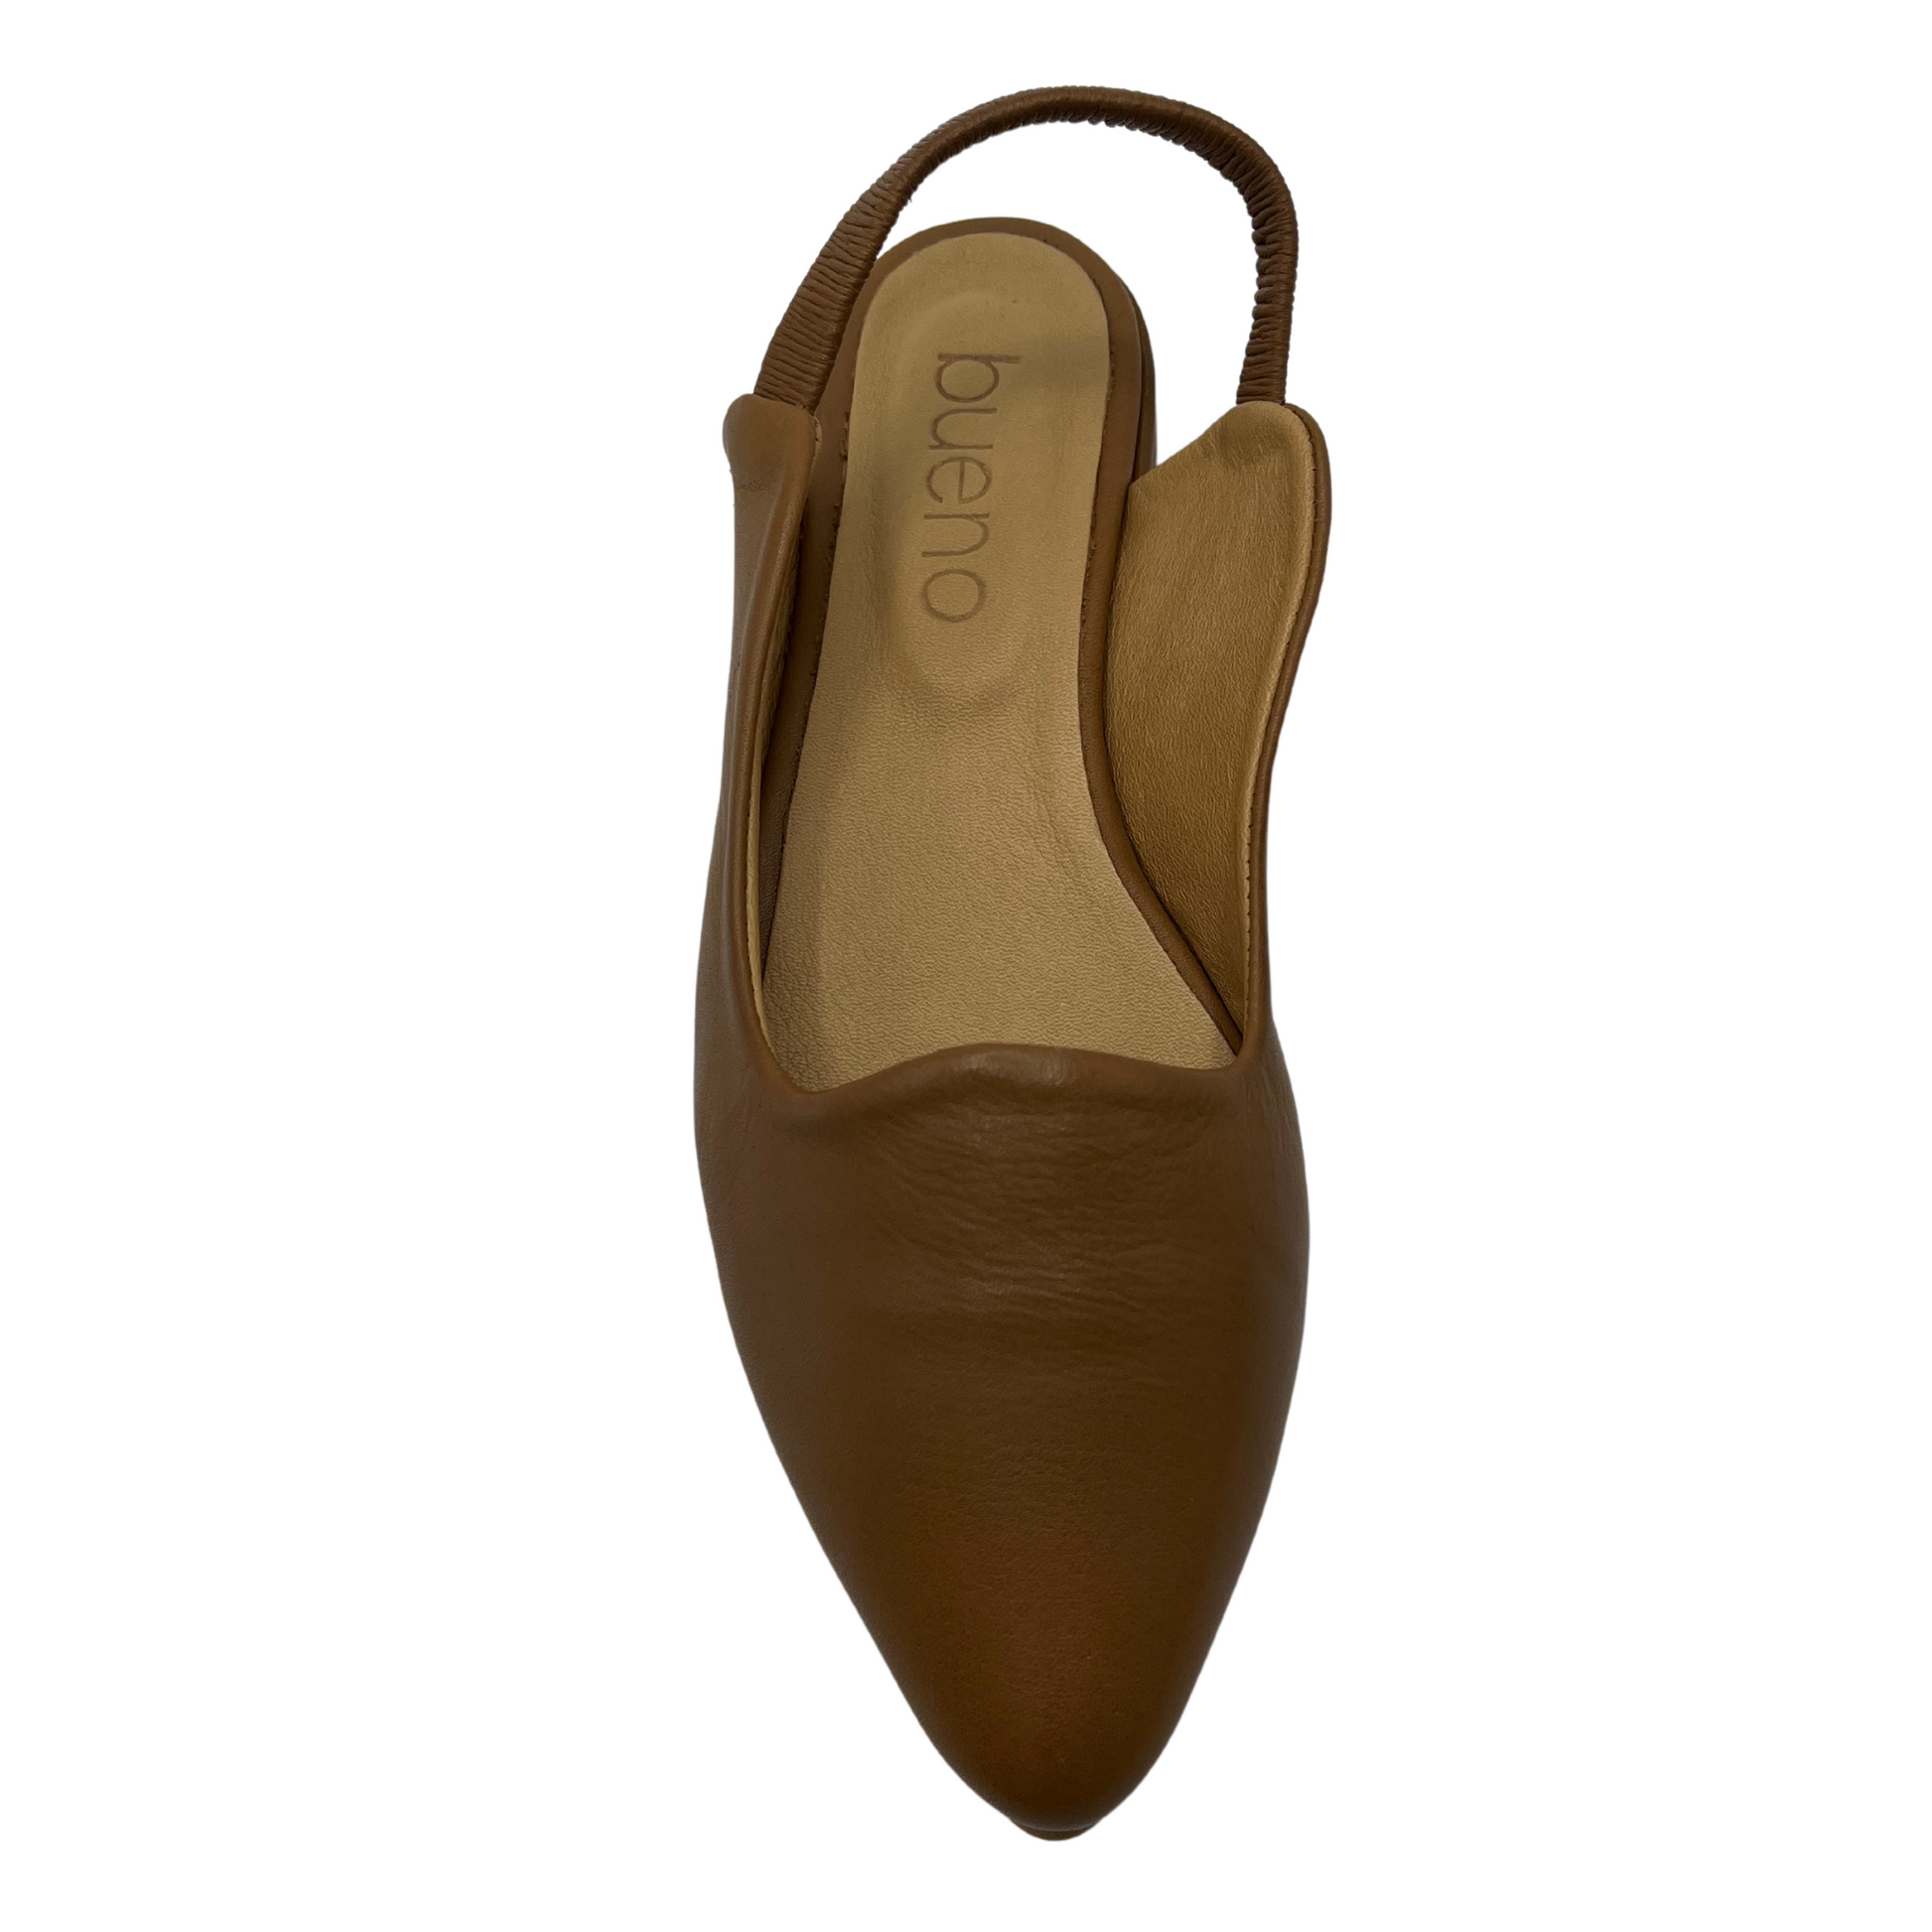 Top view of walnut leather shoe with pointed toe and slingback strap